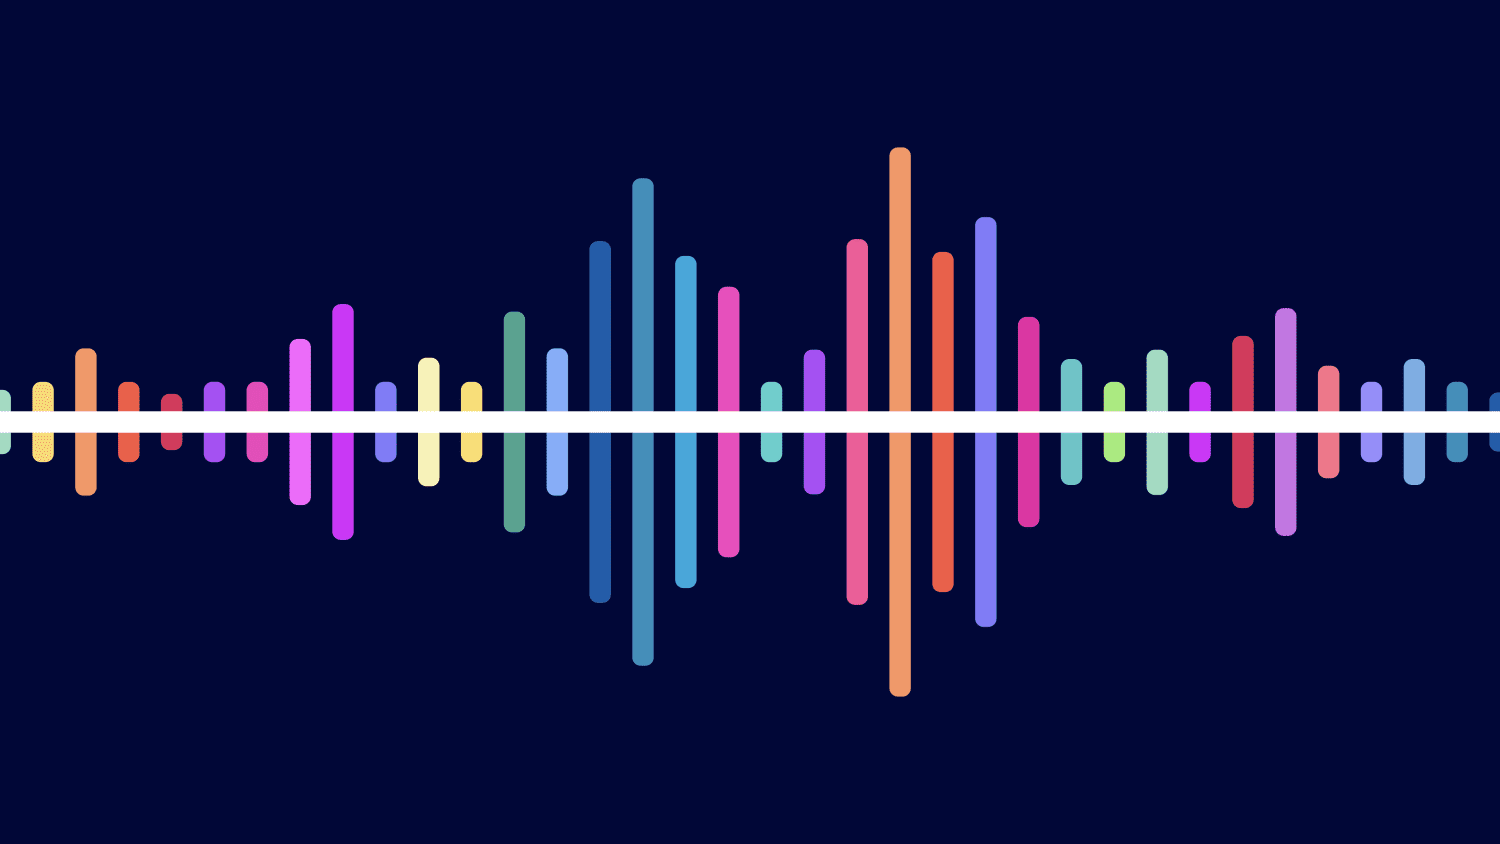 Colorful sound wave illustration, representing remote cochlear implant programming